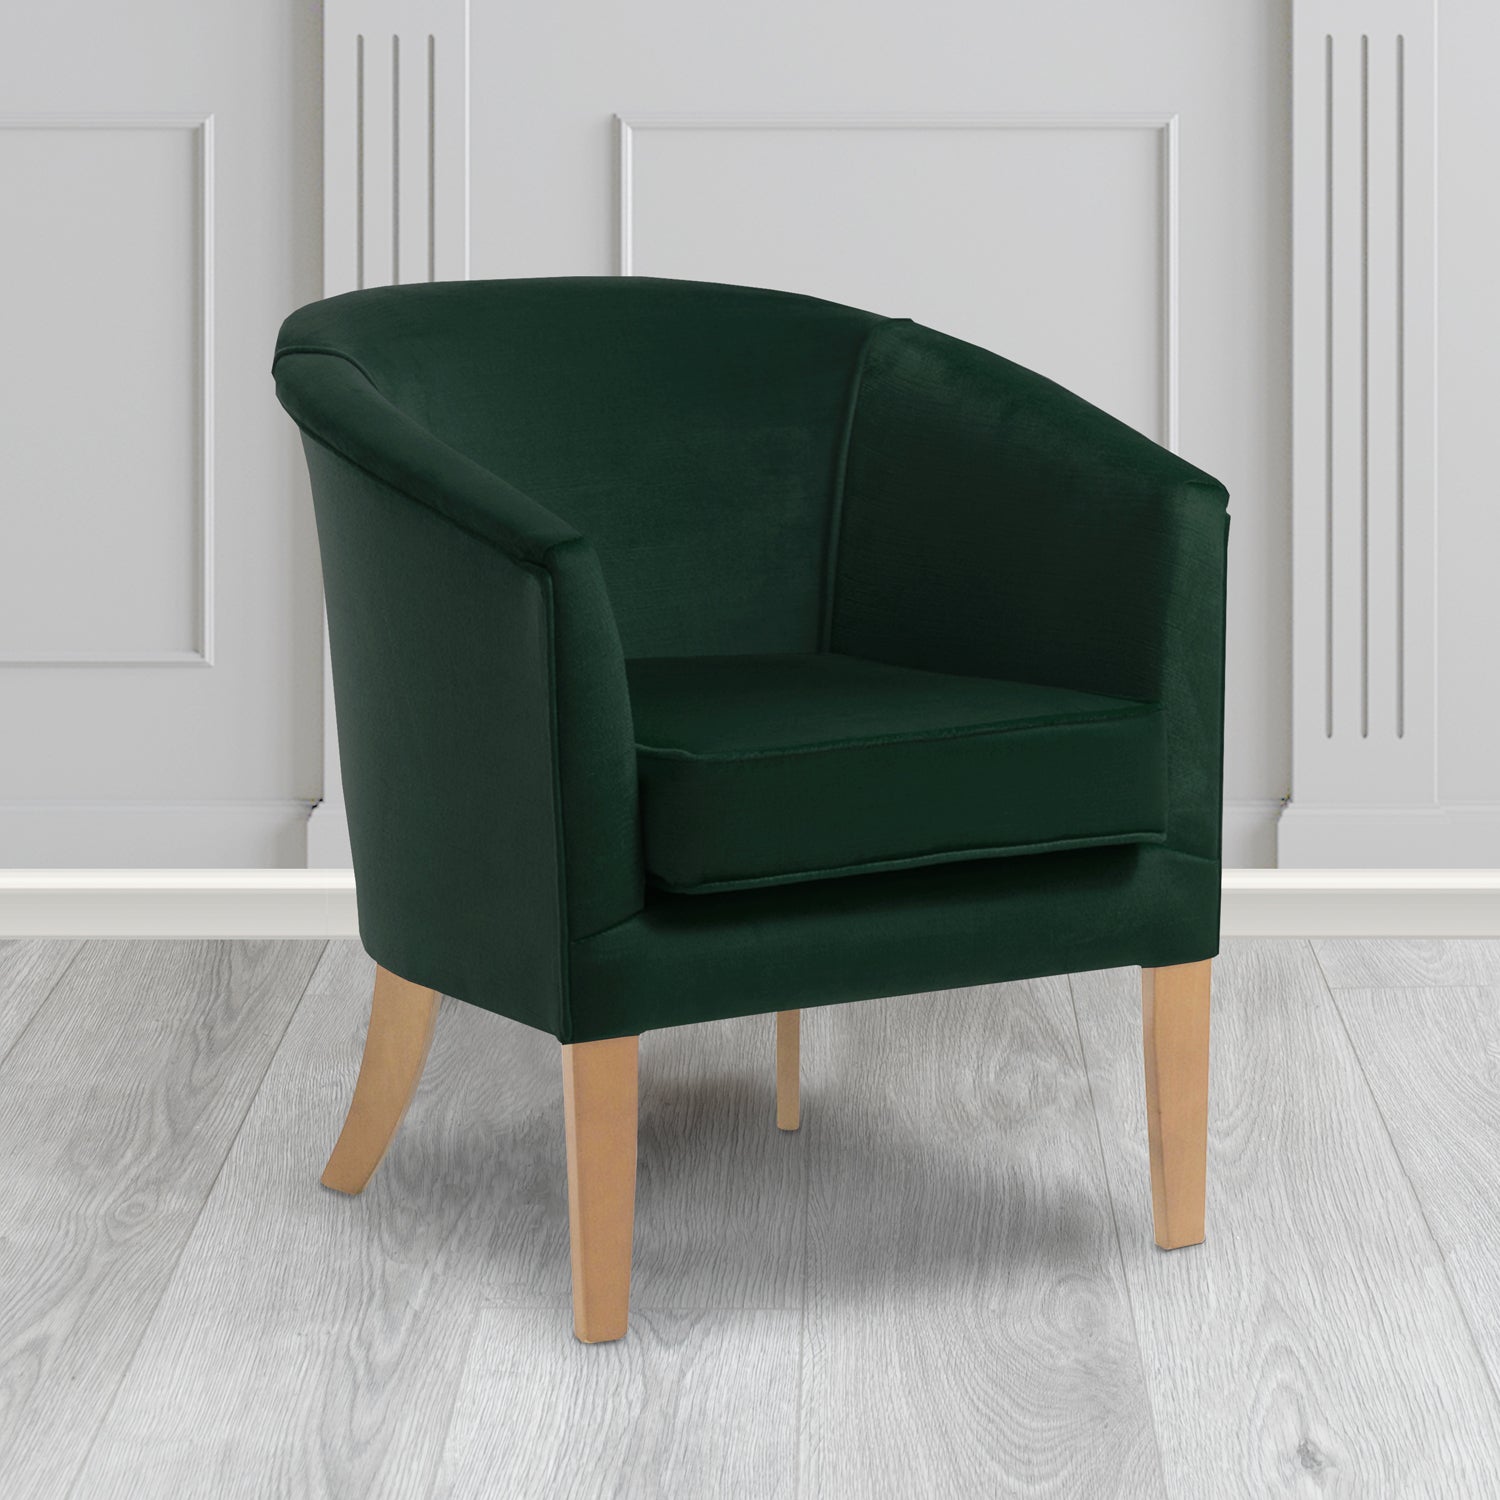 Jazz Tub Chair in Noble 228 Bottle Green Crib 5 Velvet Fabric - Water Resistant - The Tub Chair Shop